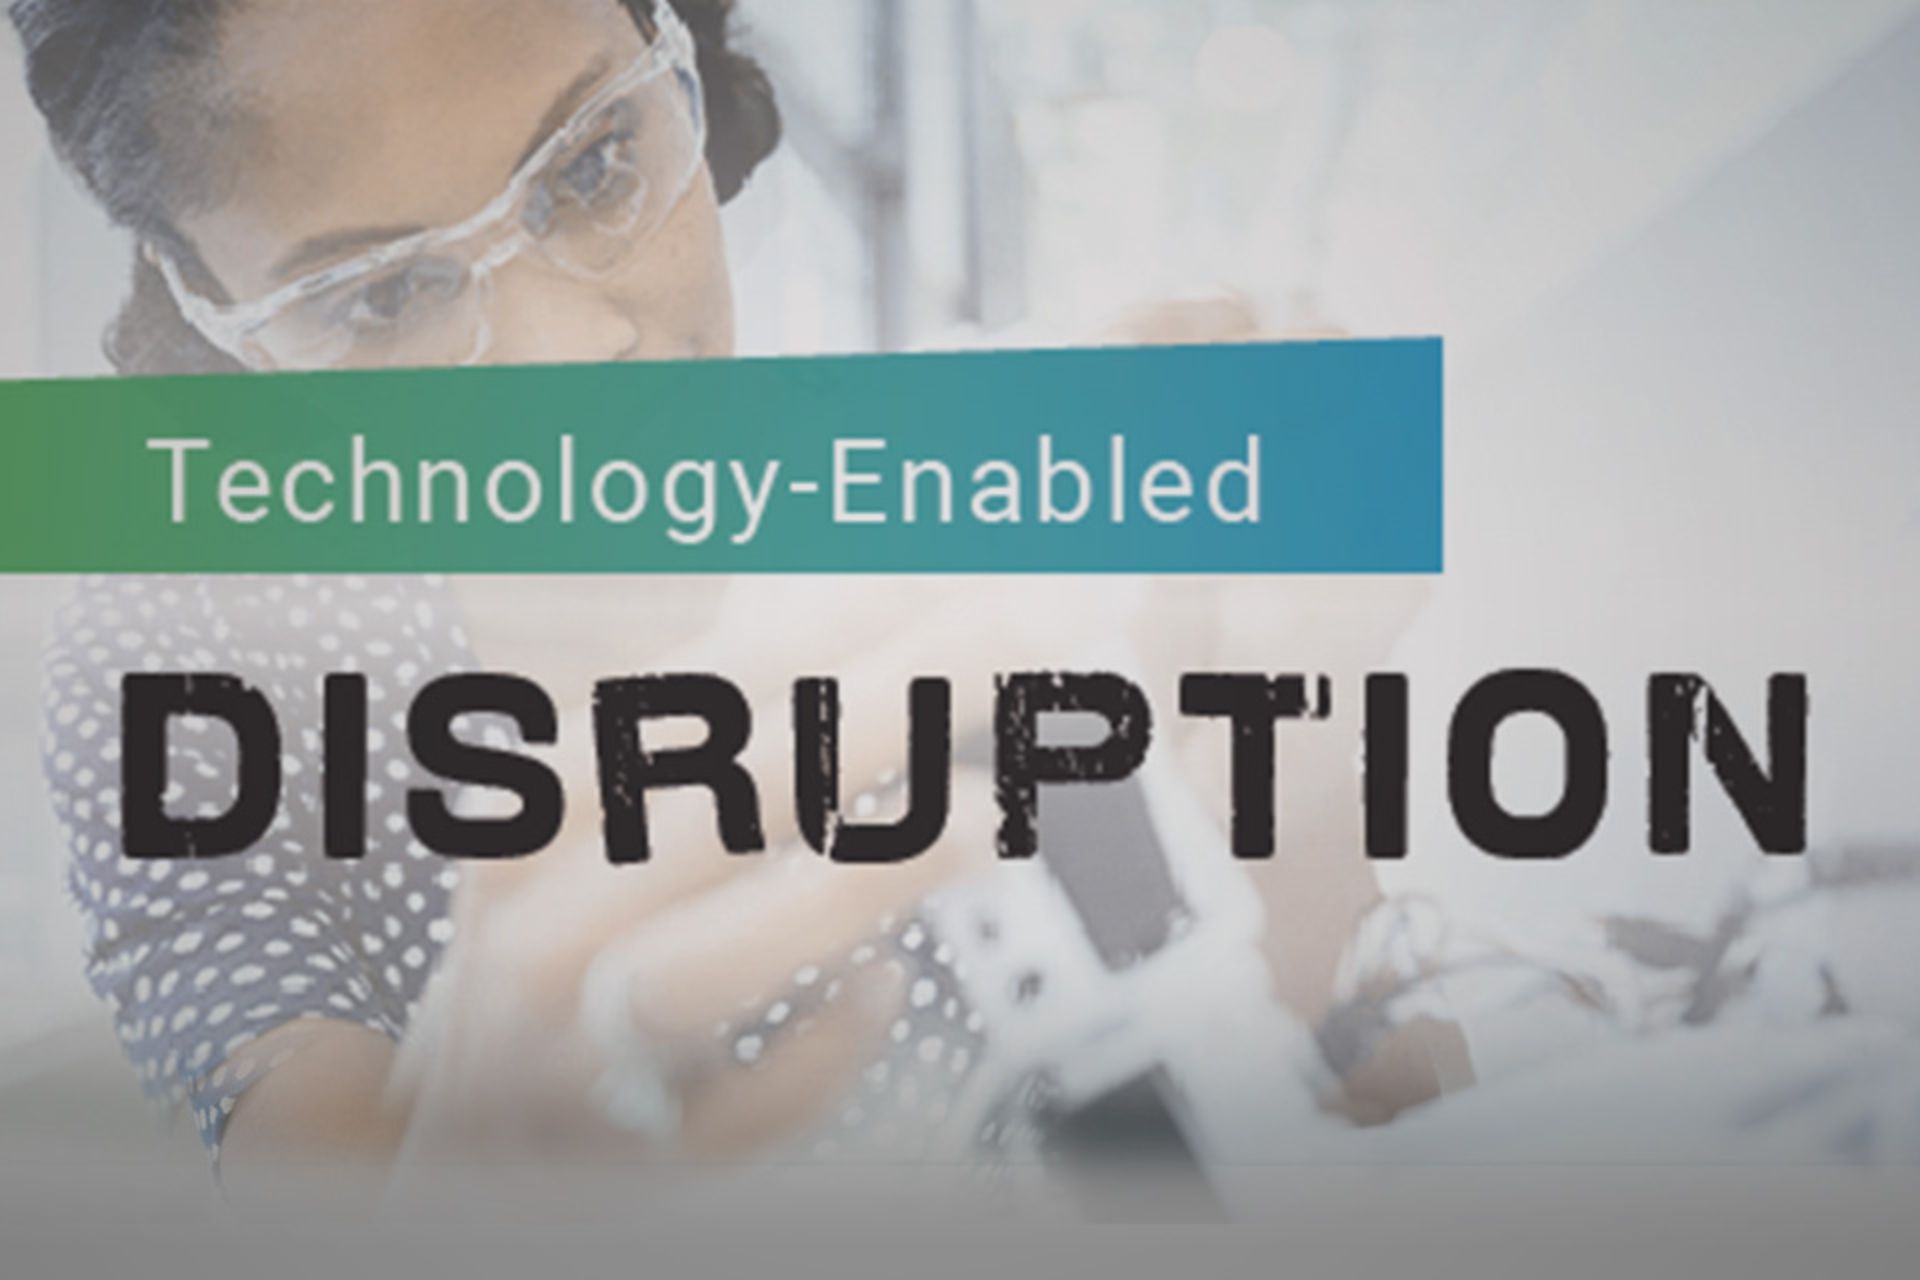 Technology-Enabled Disruption